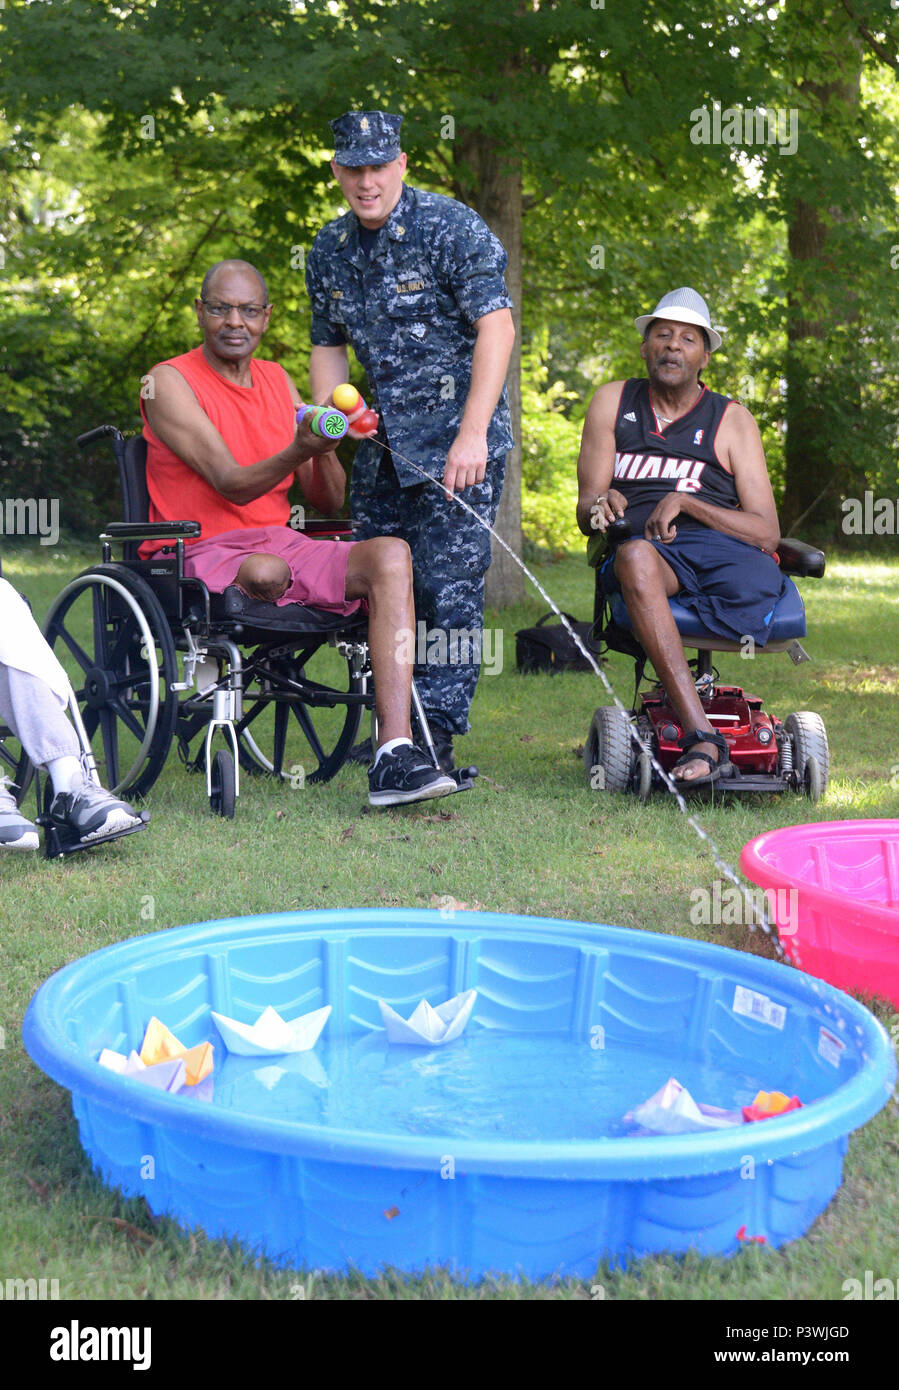 160722-N-FU443-008 NASHVILLE (July 22, 2016) Chief Electrician's Mate (Nuclear) Jeremy Smith leads an outdoor game where residents of the Azalea Trace Assisted Living facility attempt to sink paper battleships with squirt guns and water balloons. Several members of Navy Recruiting District Nashville volunteered for the event in order to reach out to local members of the community. (U.S. Navy photo by Mass Communication Specialist 1st Class Timothy Walter/Released) Stock Photo